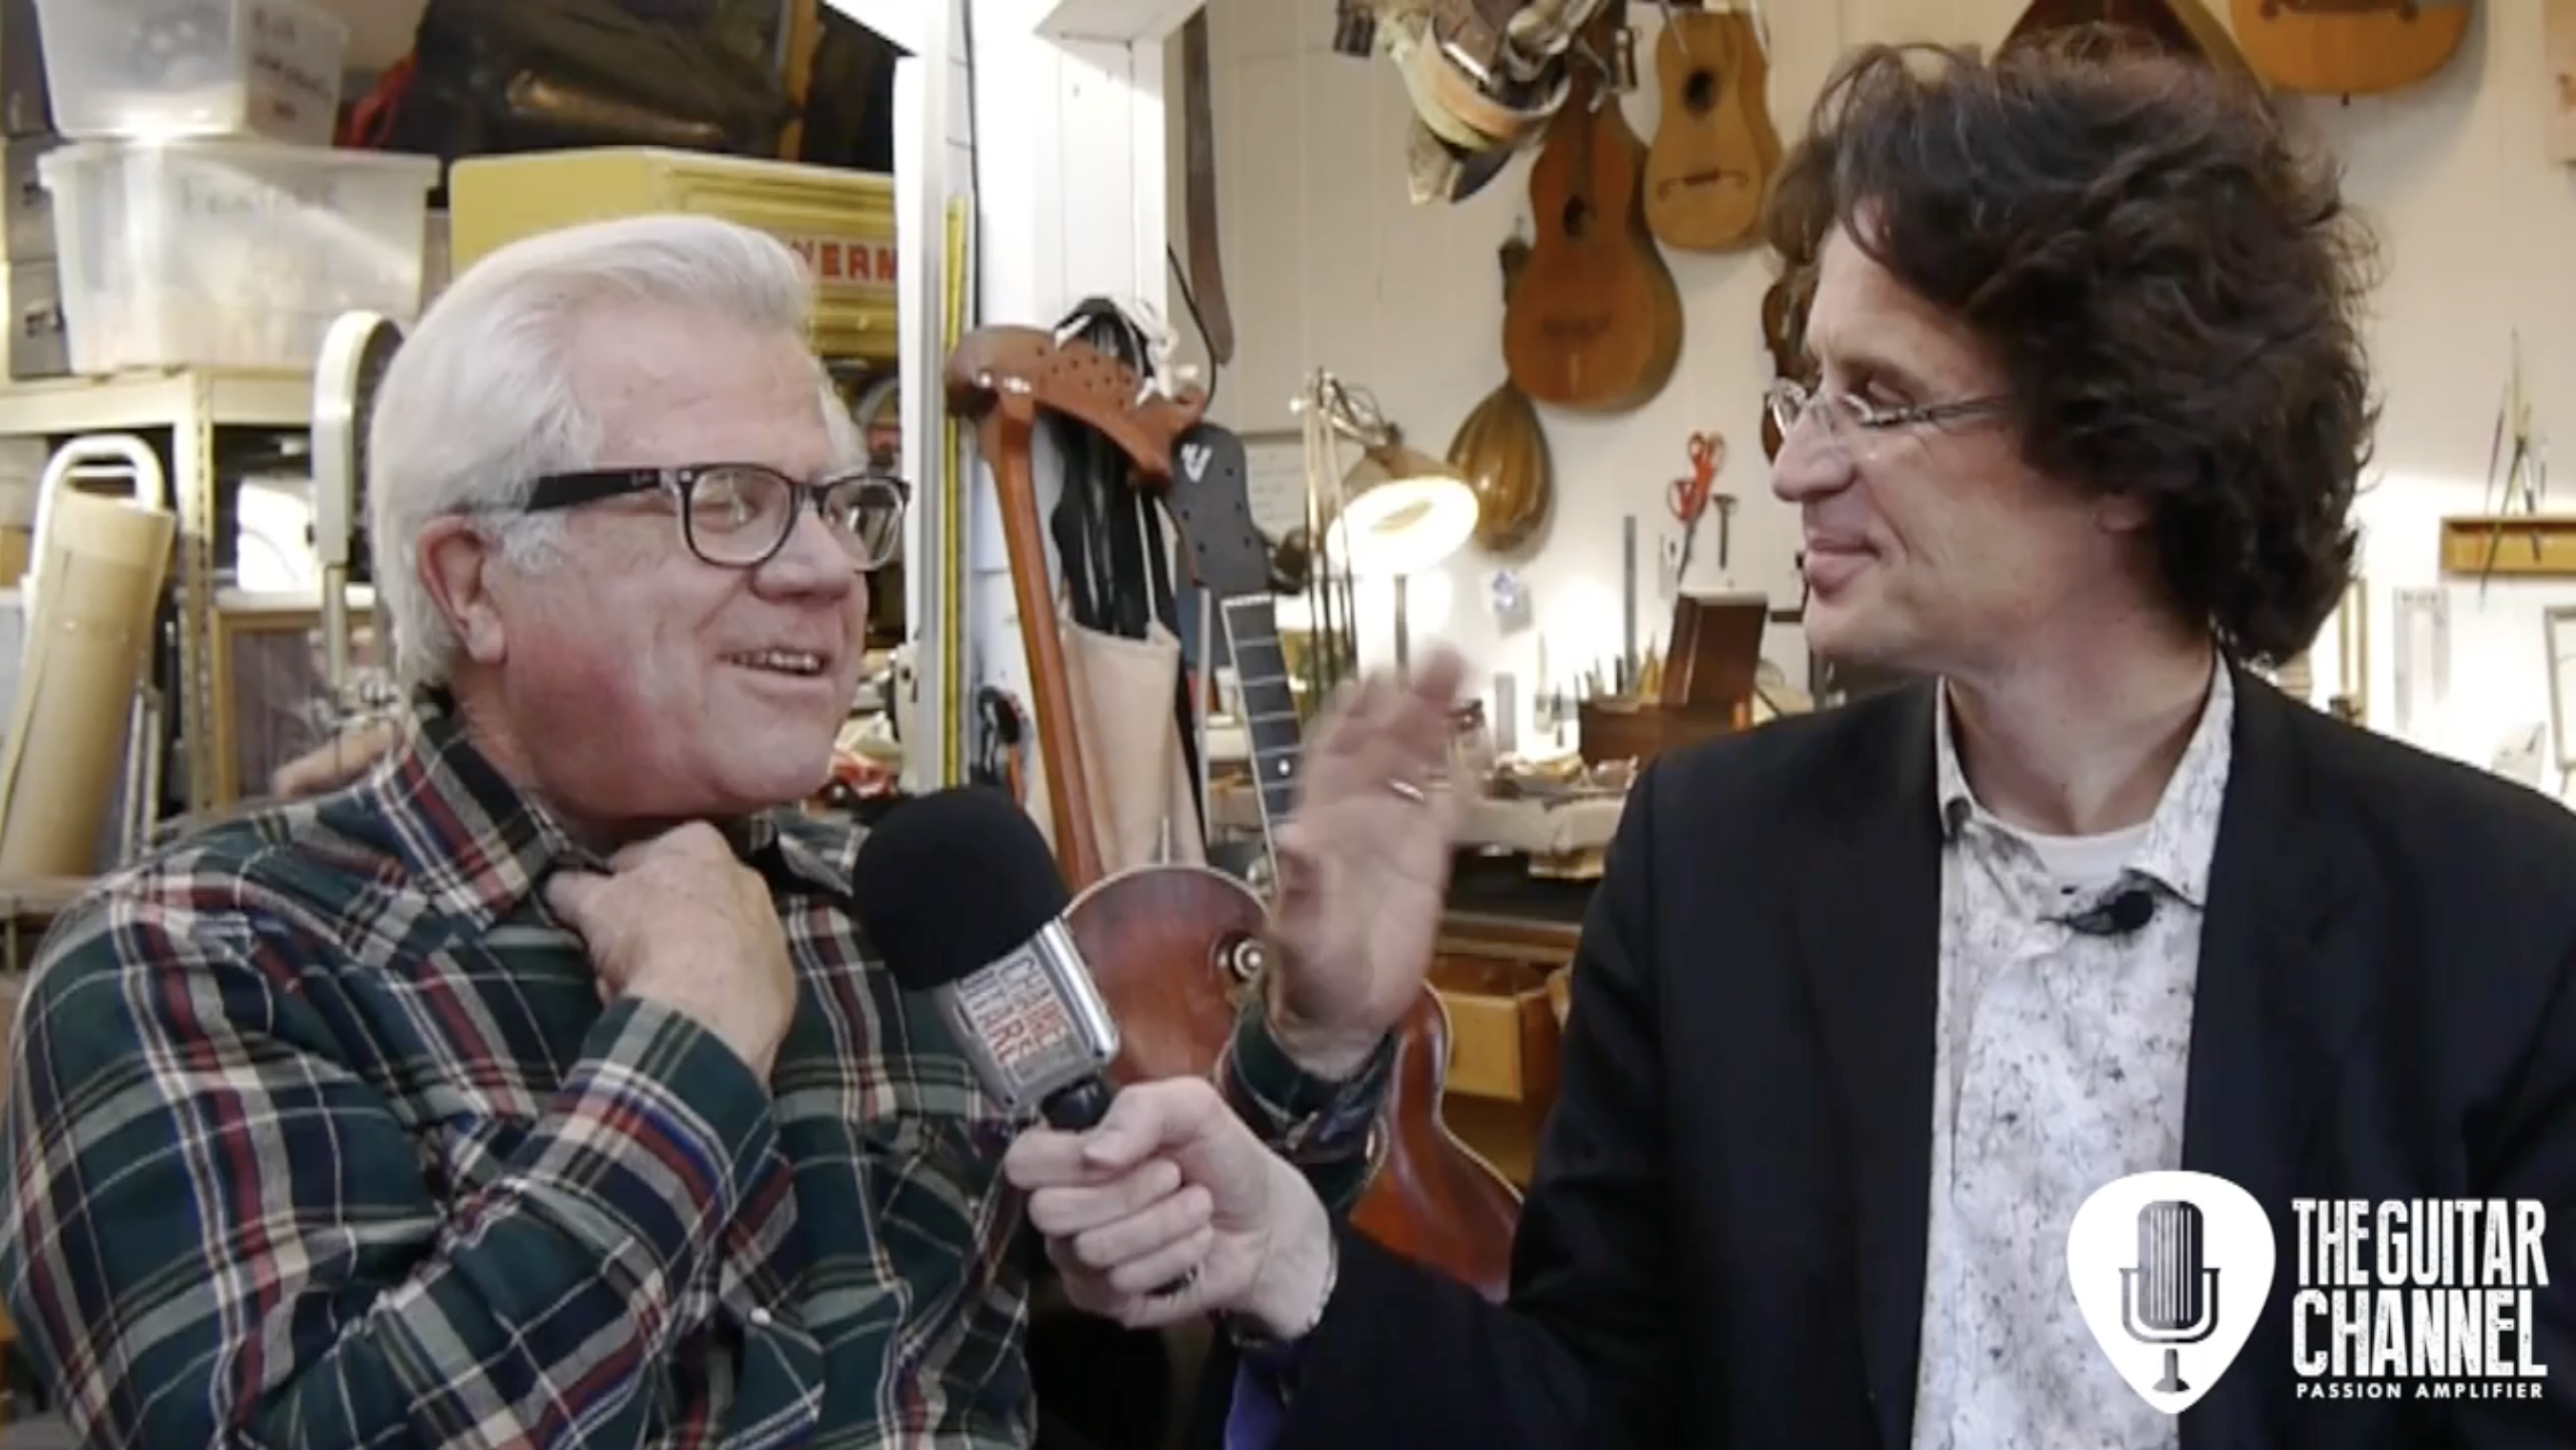 Fred Walecki, interview with the legendary boss of Westwood Music in LA - Archives Treasury